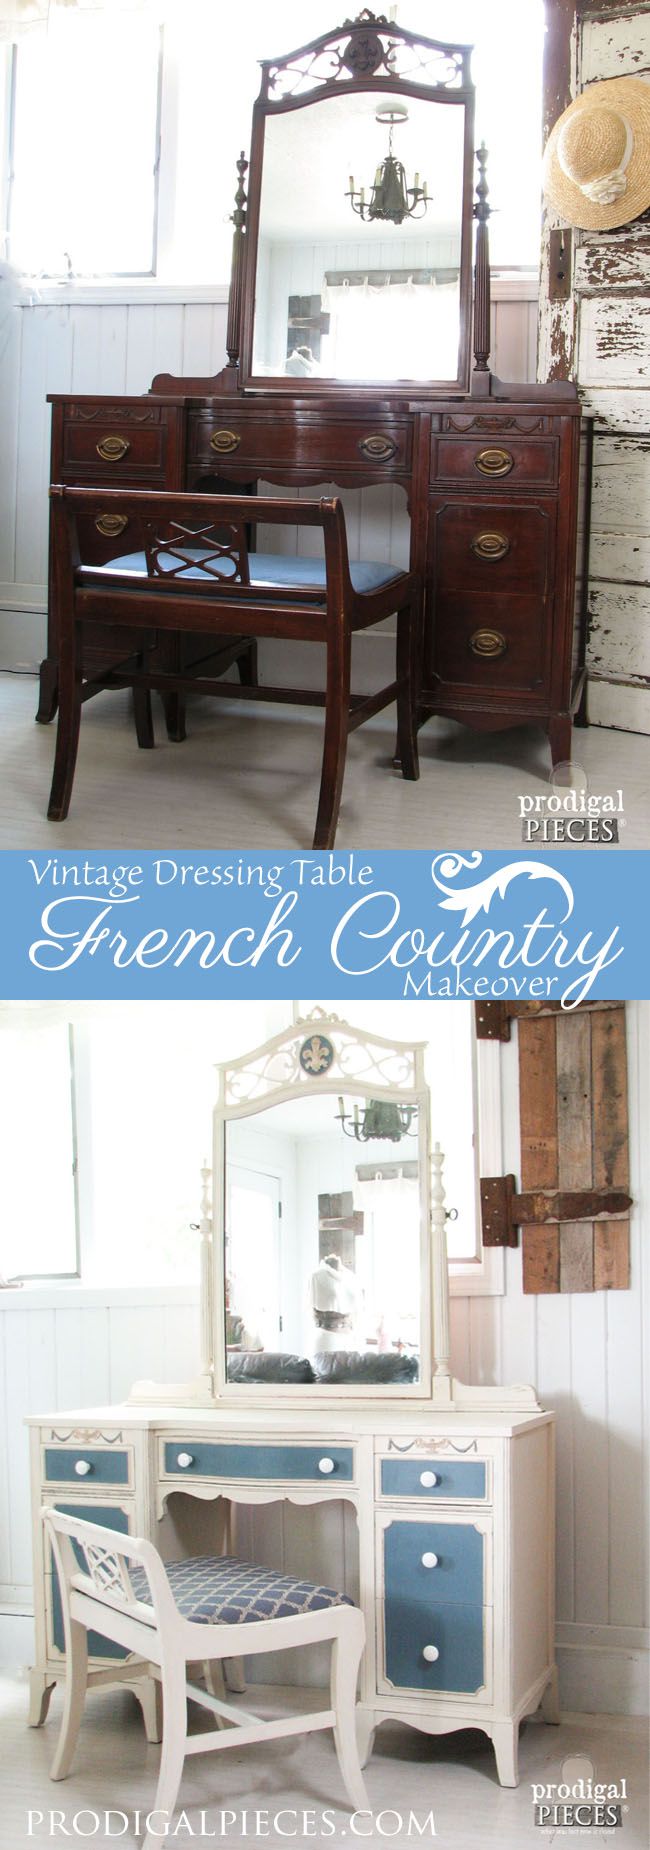 Vintage Dressing Table French Country Makeover – Prodigal Pieces